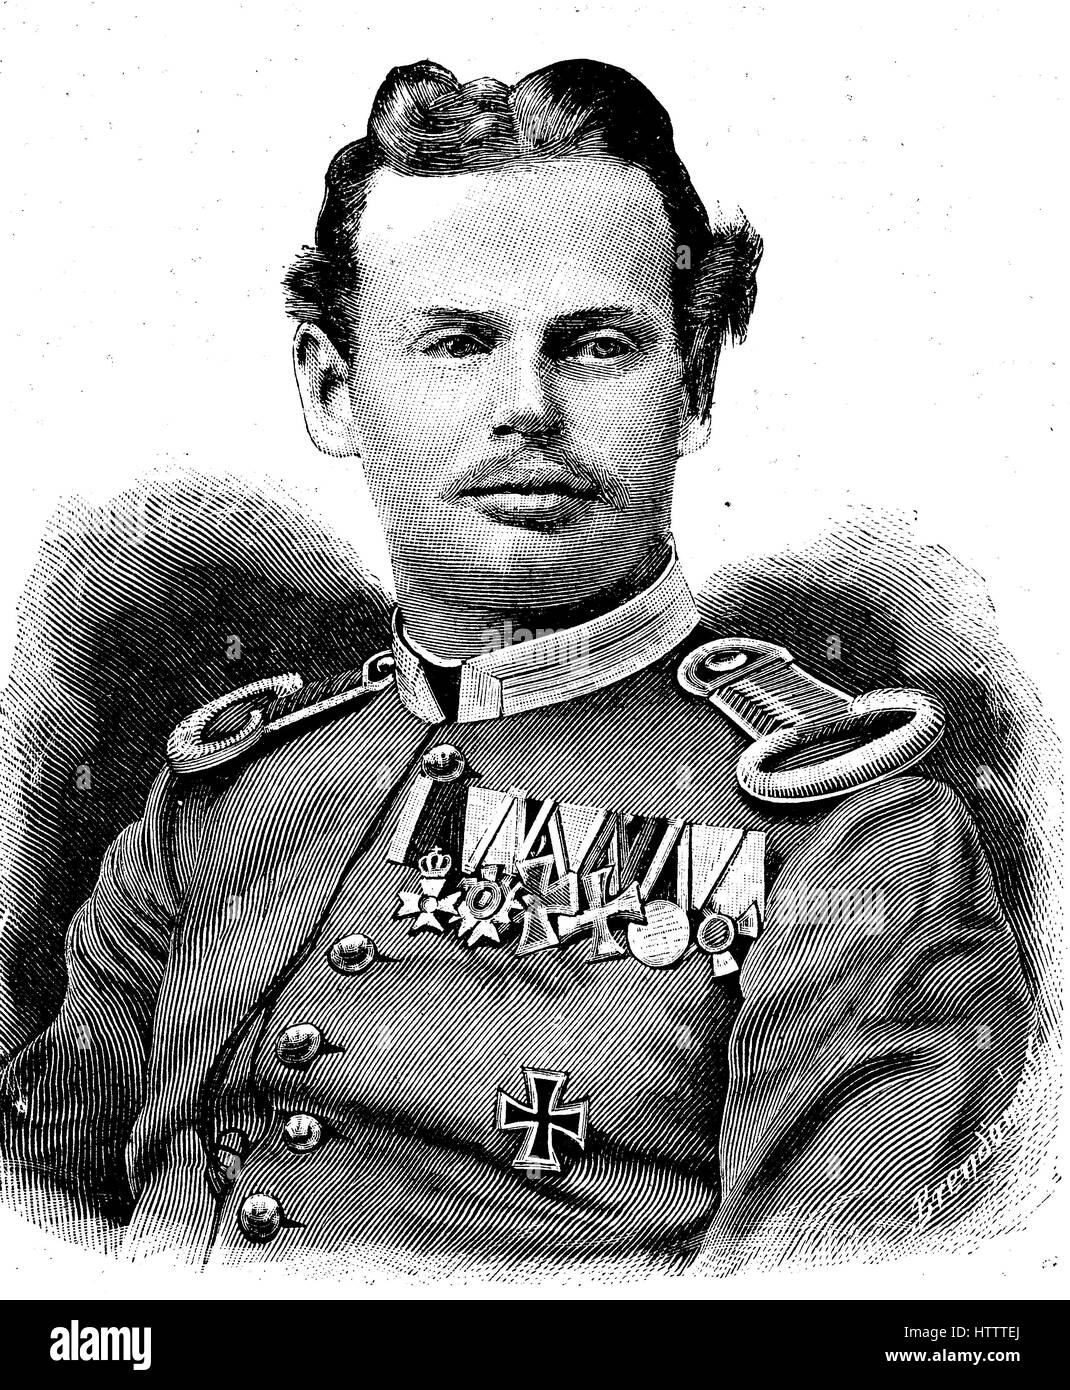 Military people in the Franco-Prussian War 1870 - 1871, Prince Leopold Maximilian Joseph Maria Arnulf, Prinz von Bayern, 9 February 1846 -  28 September 1930, was a Field Marshal , reproduction of a woodcut from 1882, digital improved Stock Photo